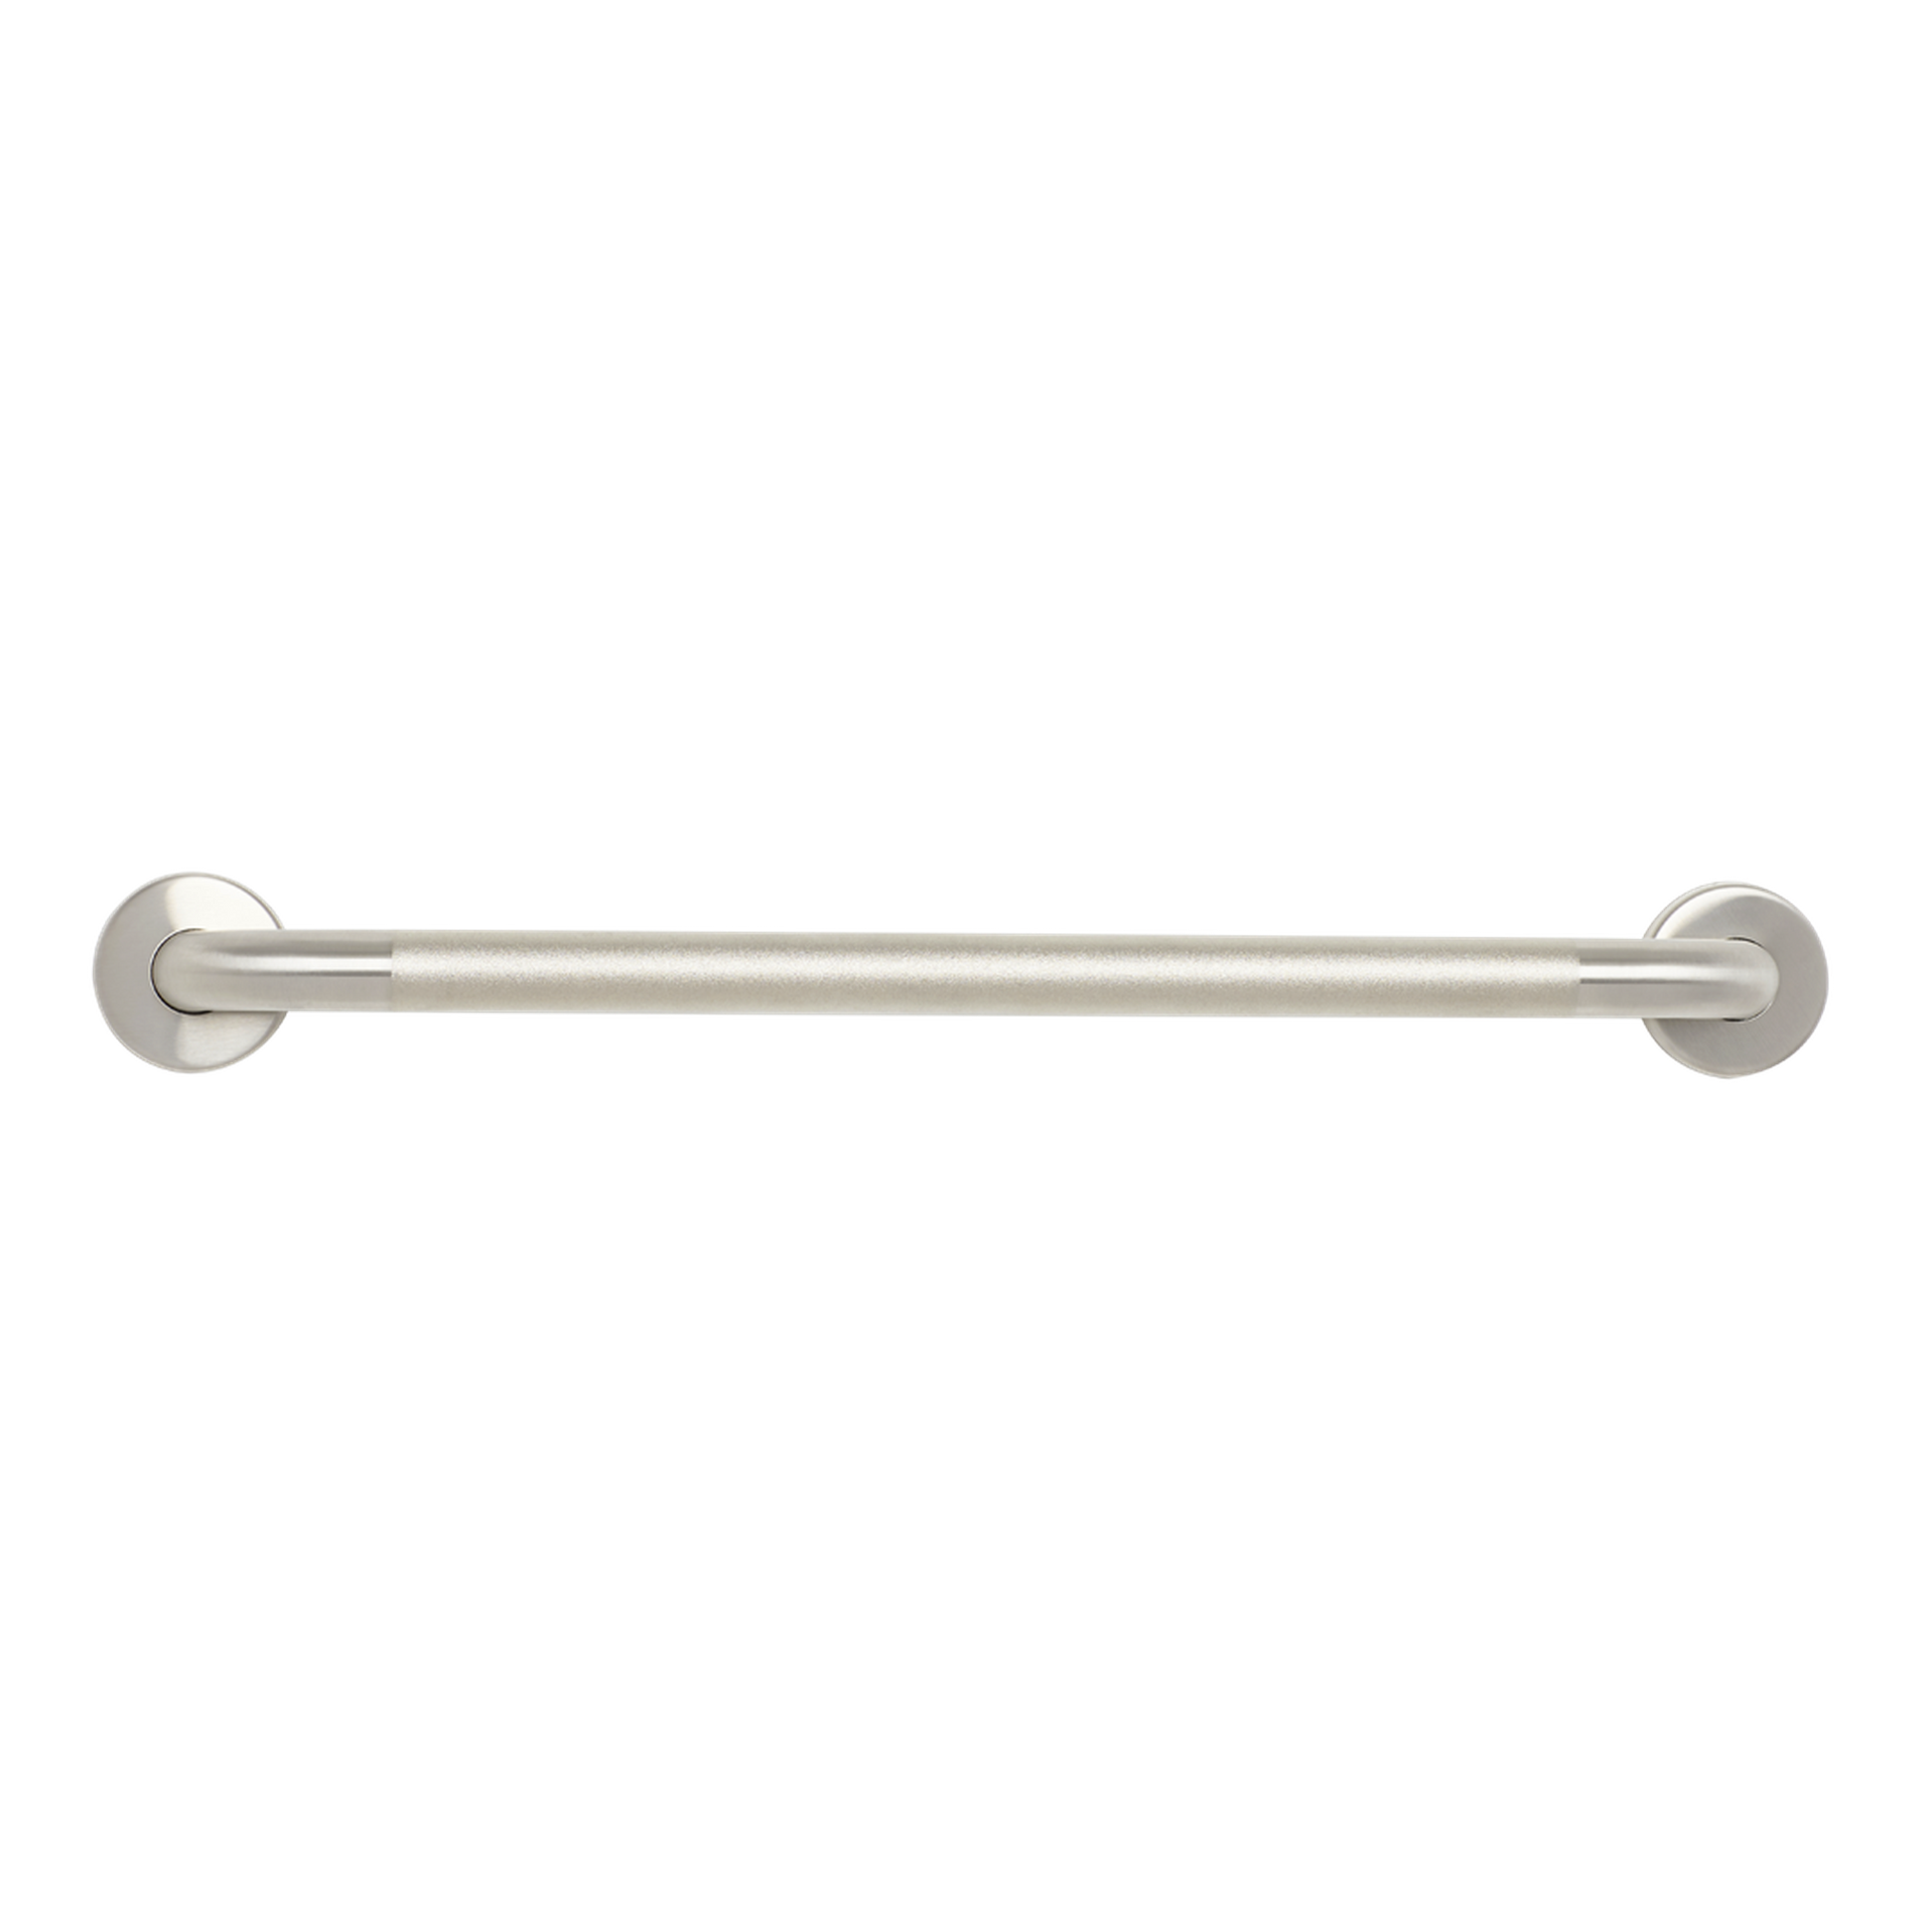 Seachrome Signature Series Value Line 12" Peened Stainless Steel With Satin Ends 1.25" Tube Diameter Straight Concealed Flange Grab Bar